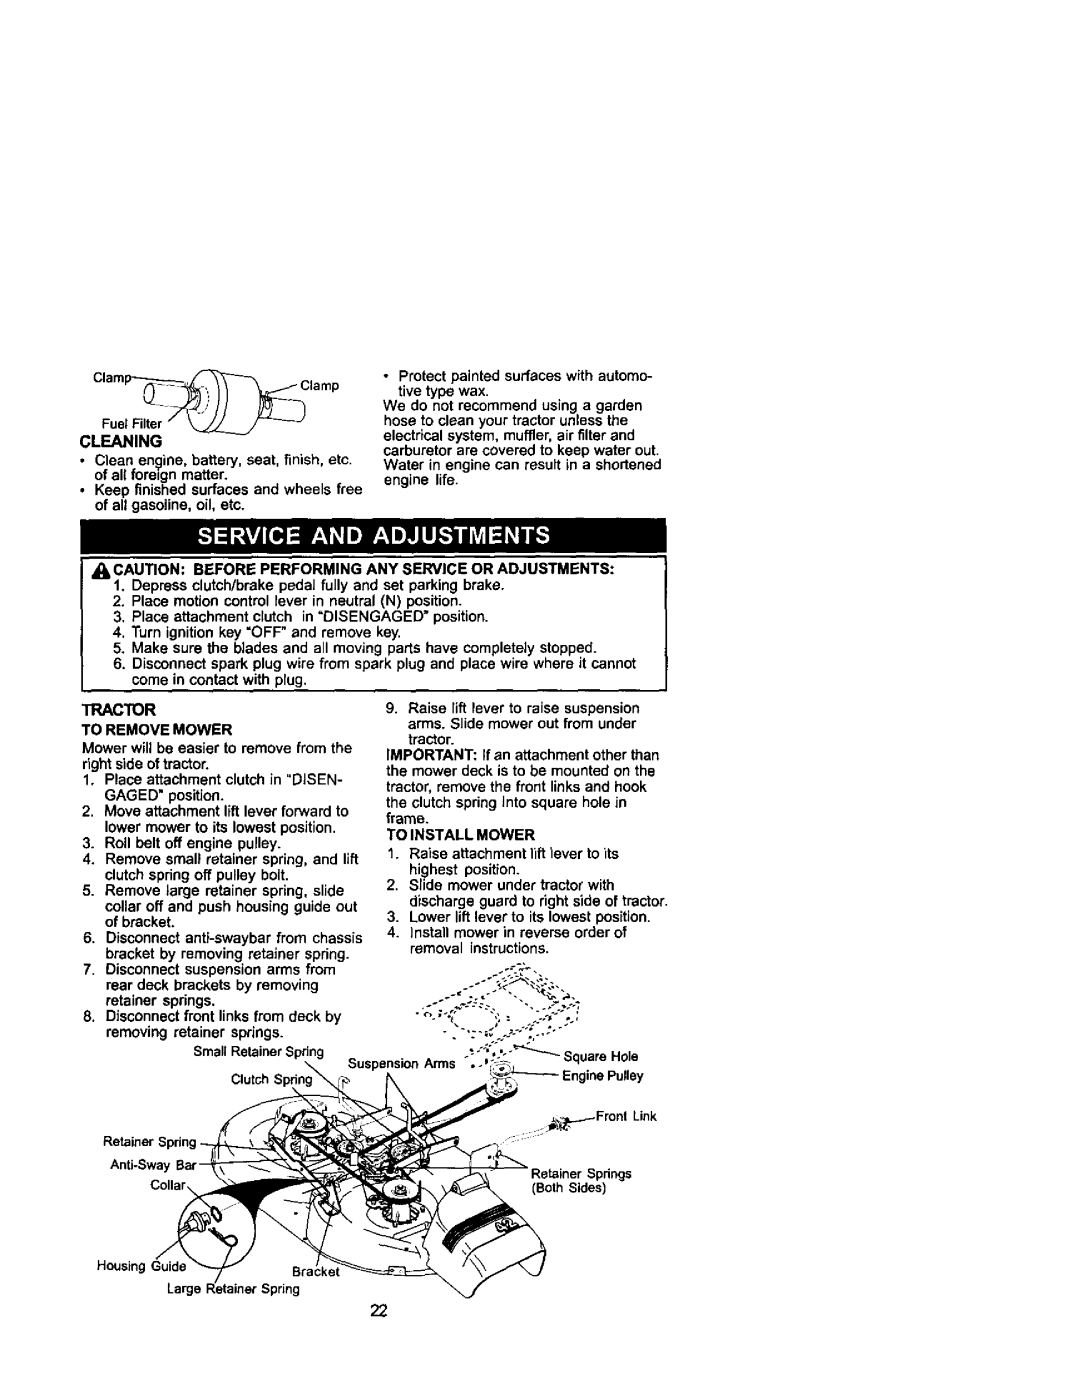 Craftsman 917.271742 owner manual Camp--Oiamp, Tractor 